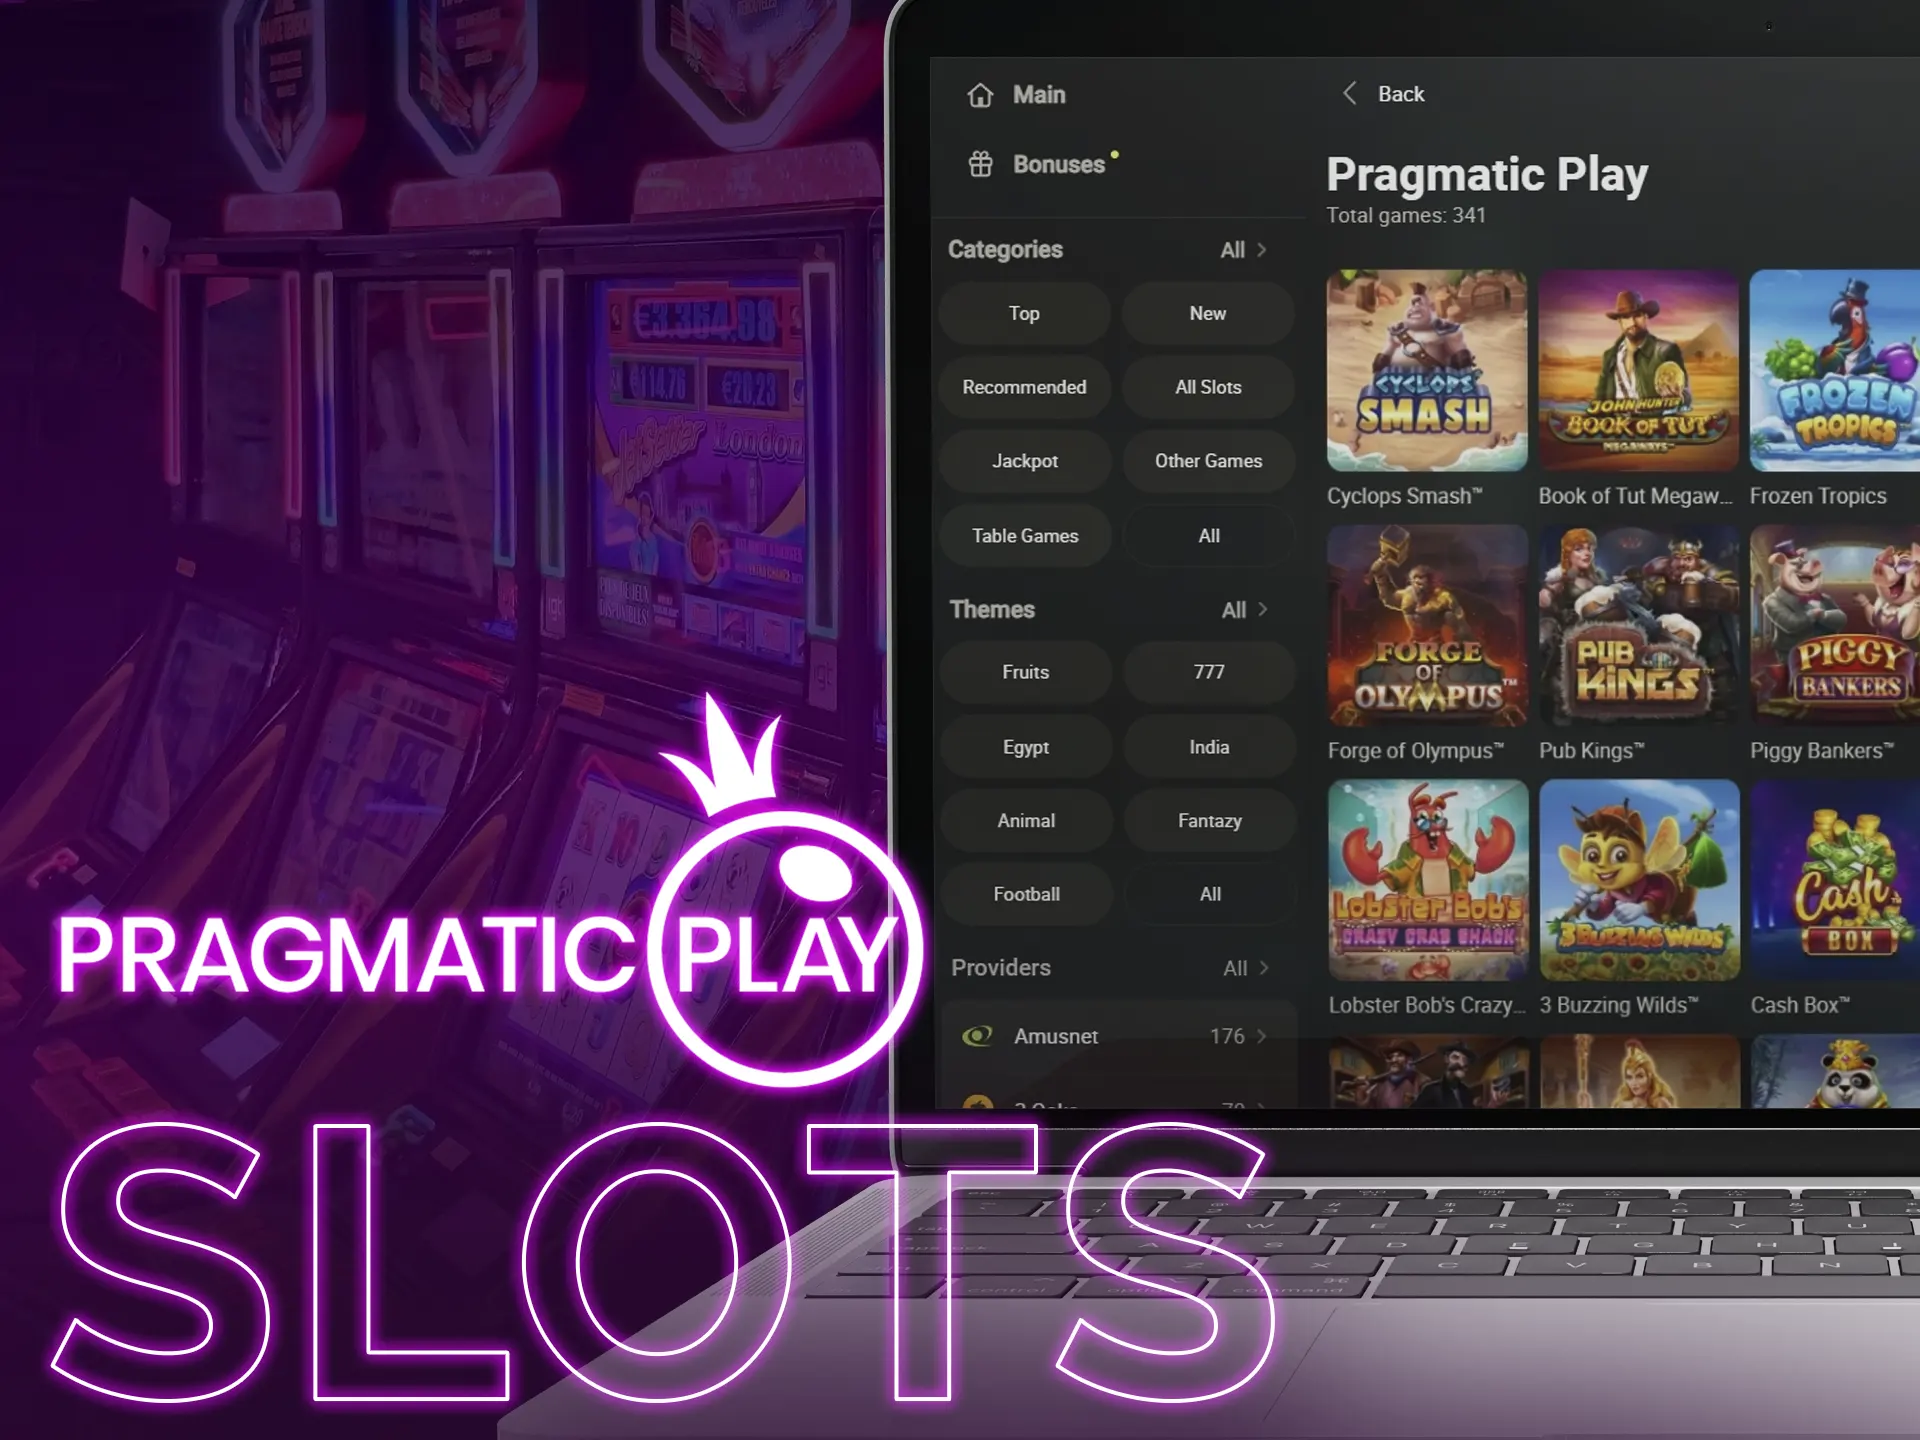 Pragmatic Play offers a wide range of slots.